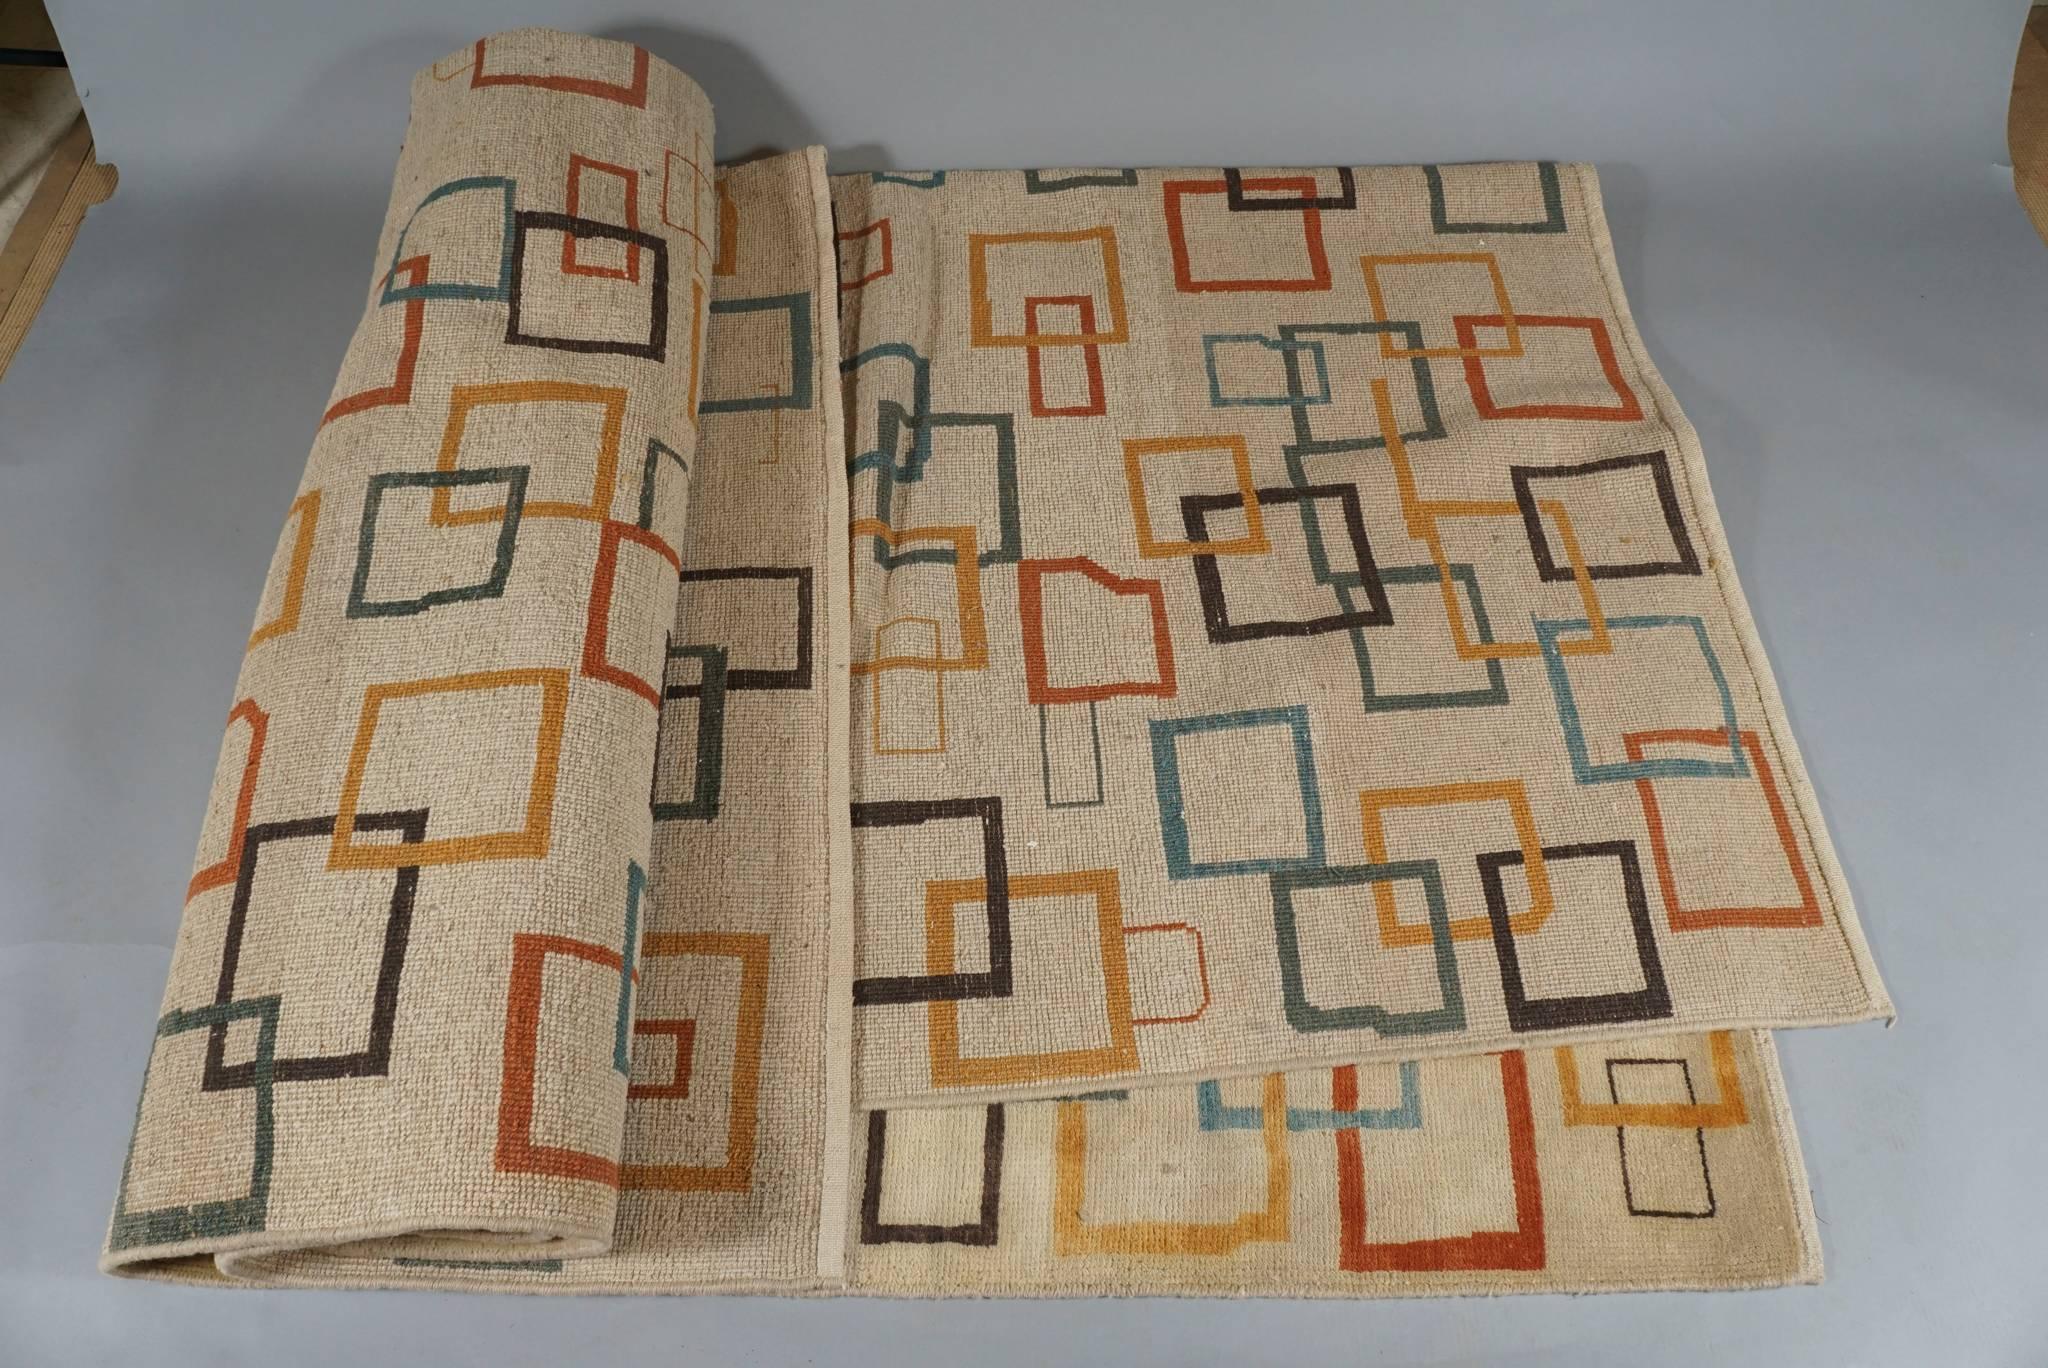 Mid-Century patterned rug.
Scandinavian (probably Danish) with wonderful color and design
Extremely large size. Very good condition. Measures: 9 x 12.